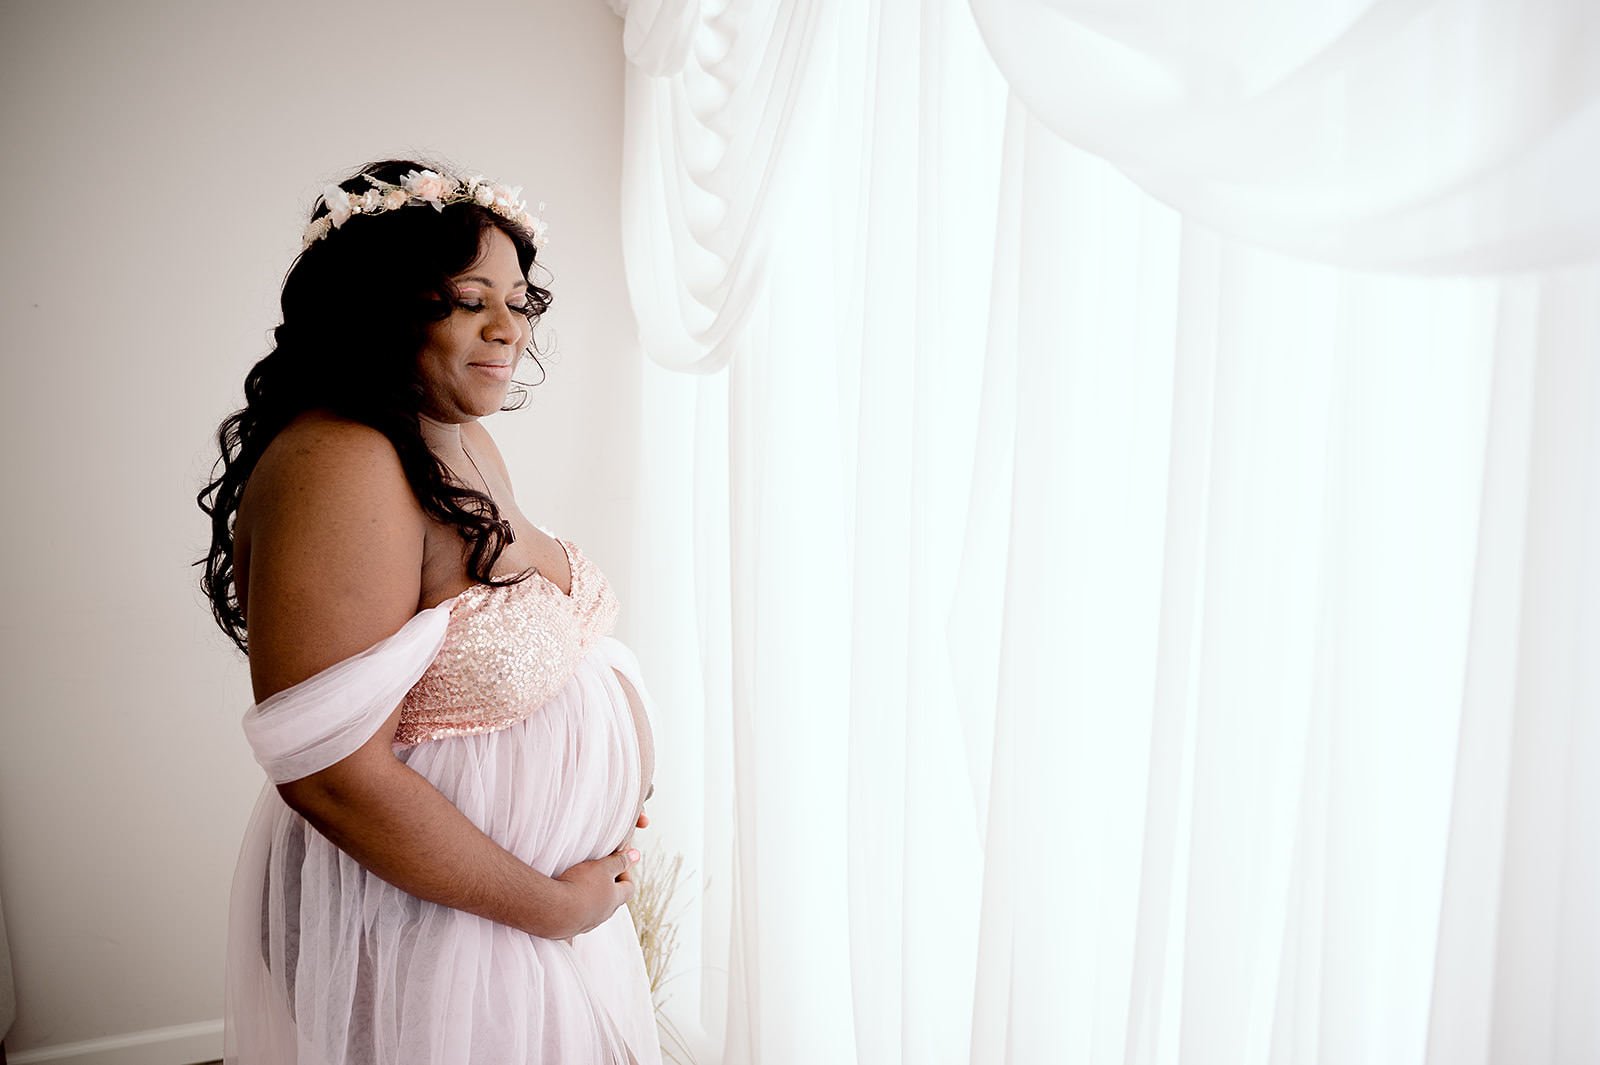 Central Minnesota maternity photographer with a studio and a client closet full of maternity gowns.